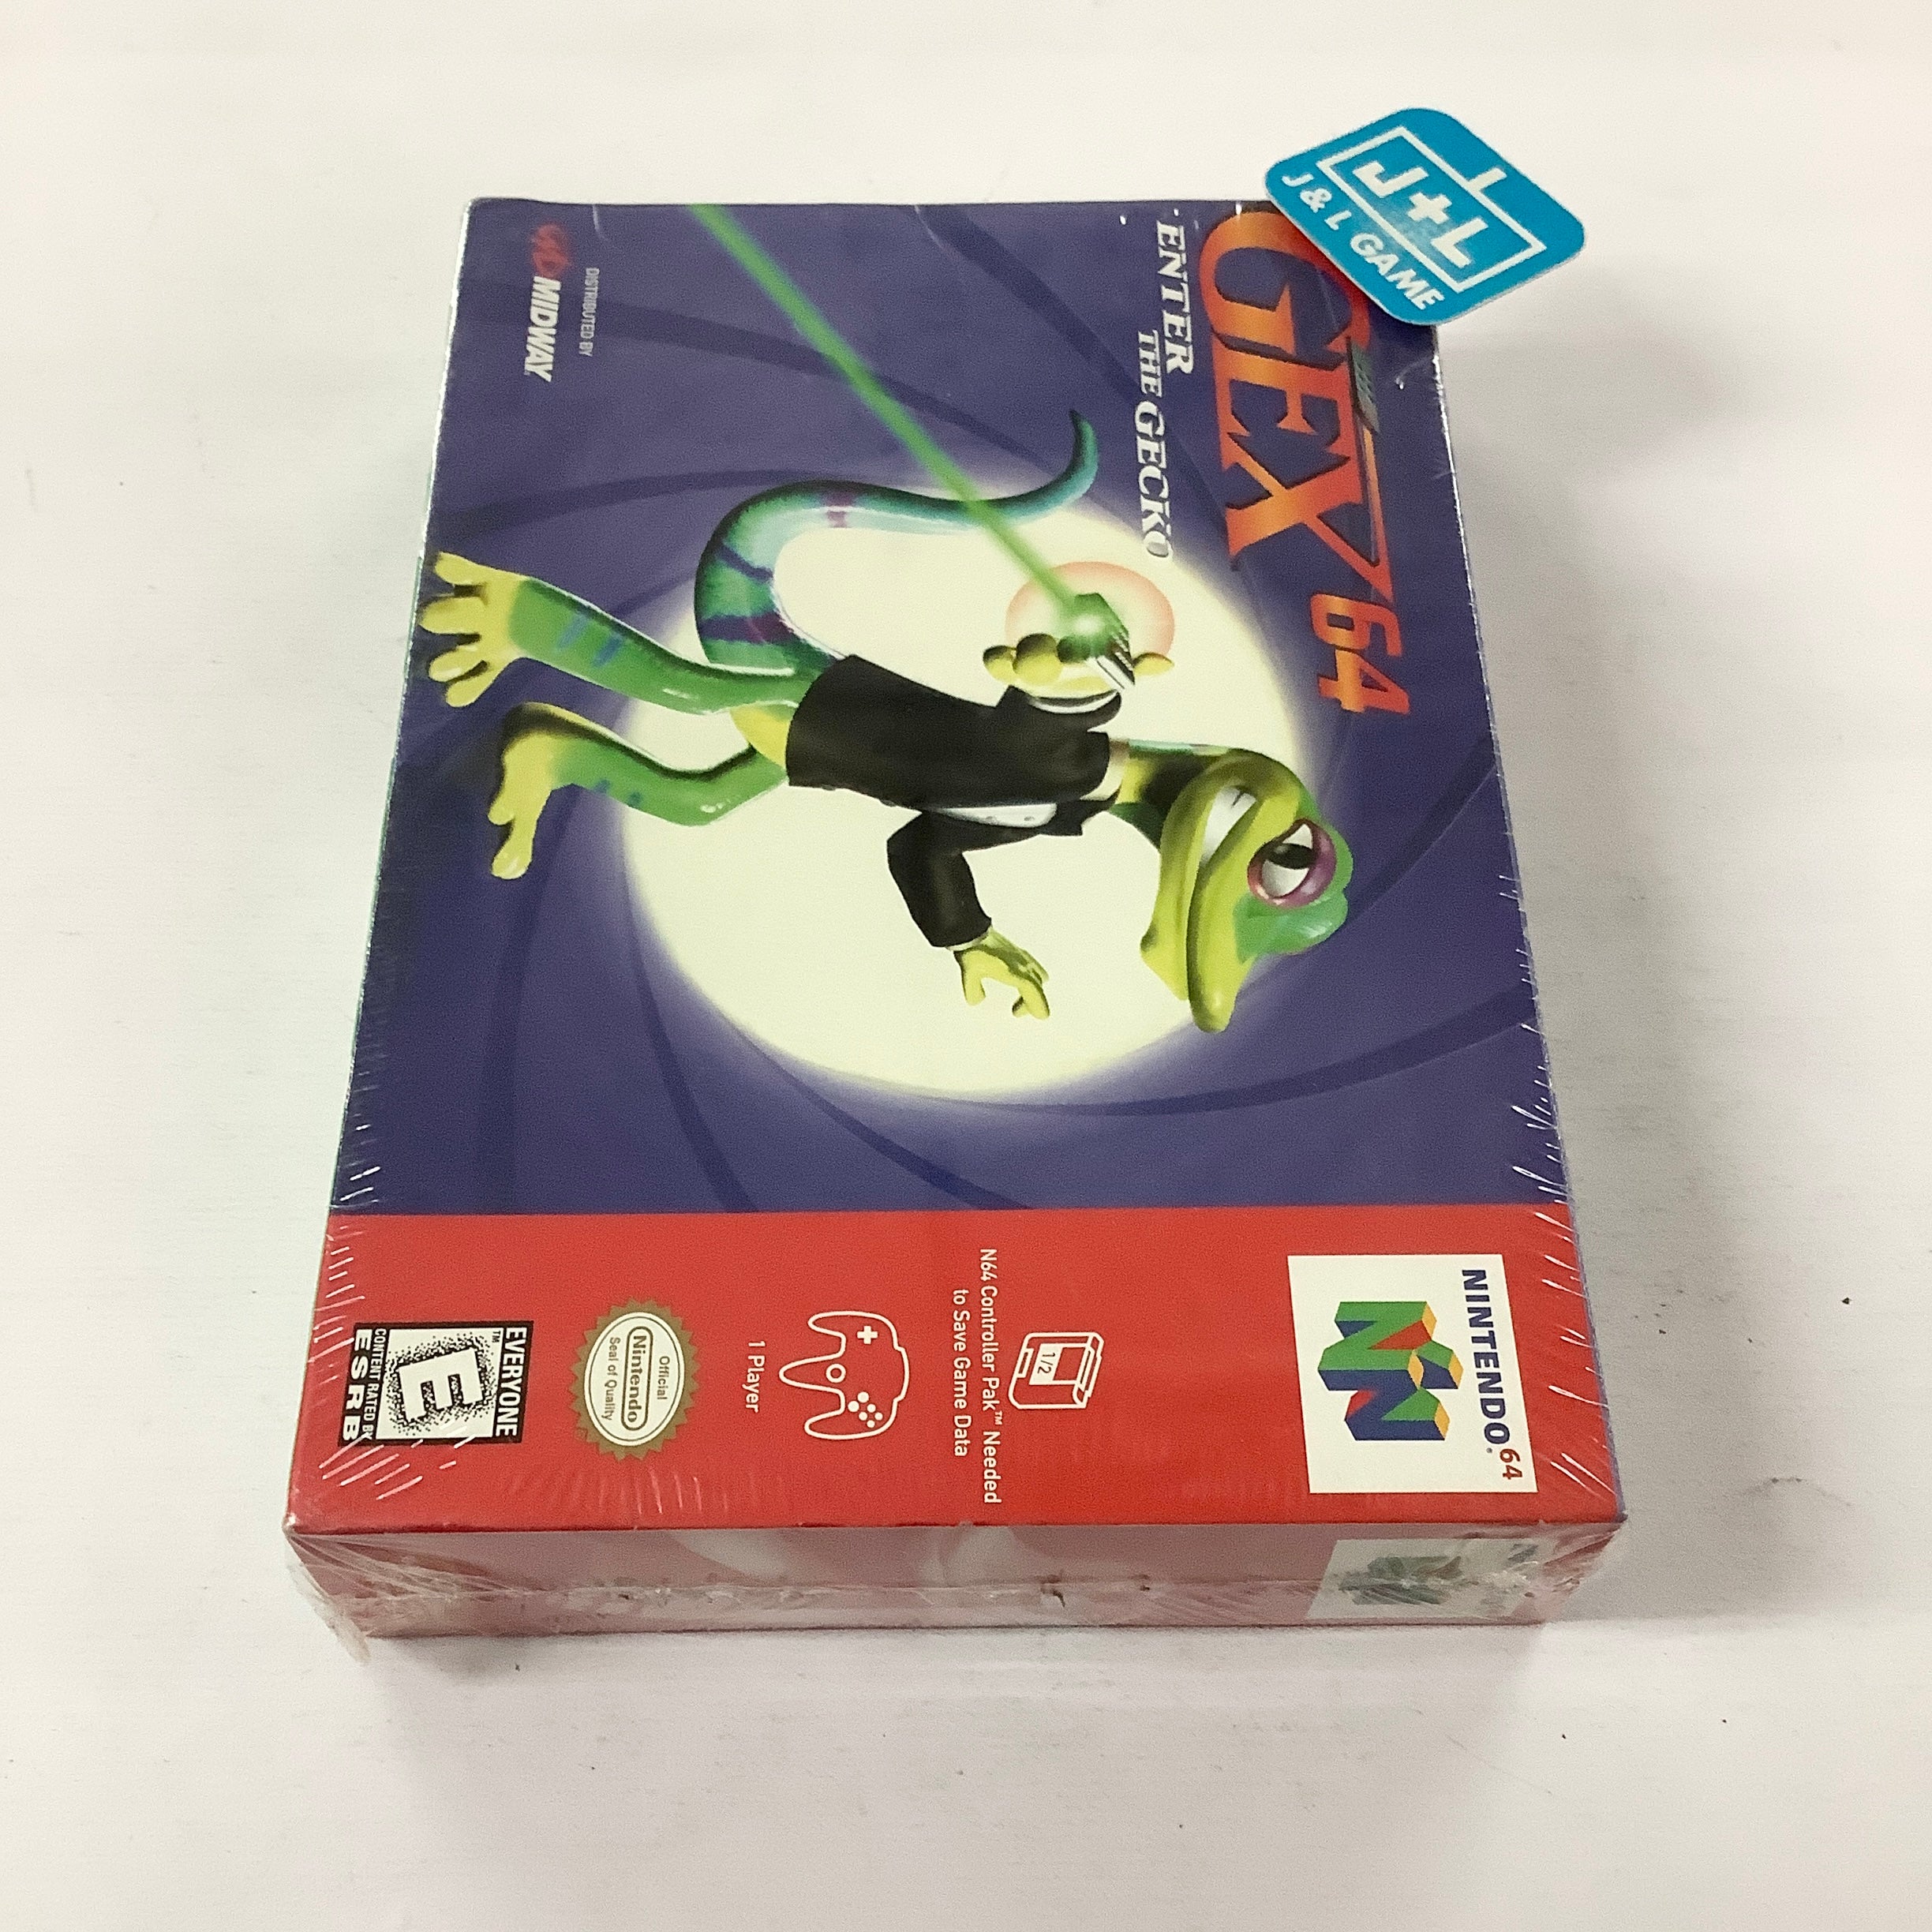 Gex 64: Enter the Gecko - (N64) Nintendo 64 Video Games Midway   